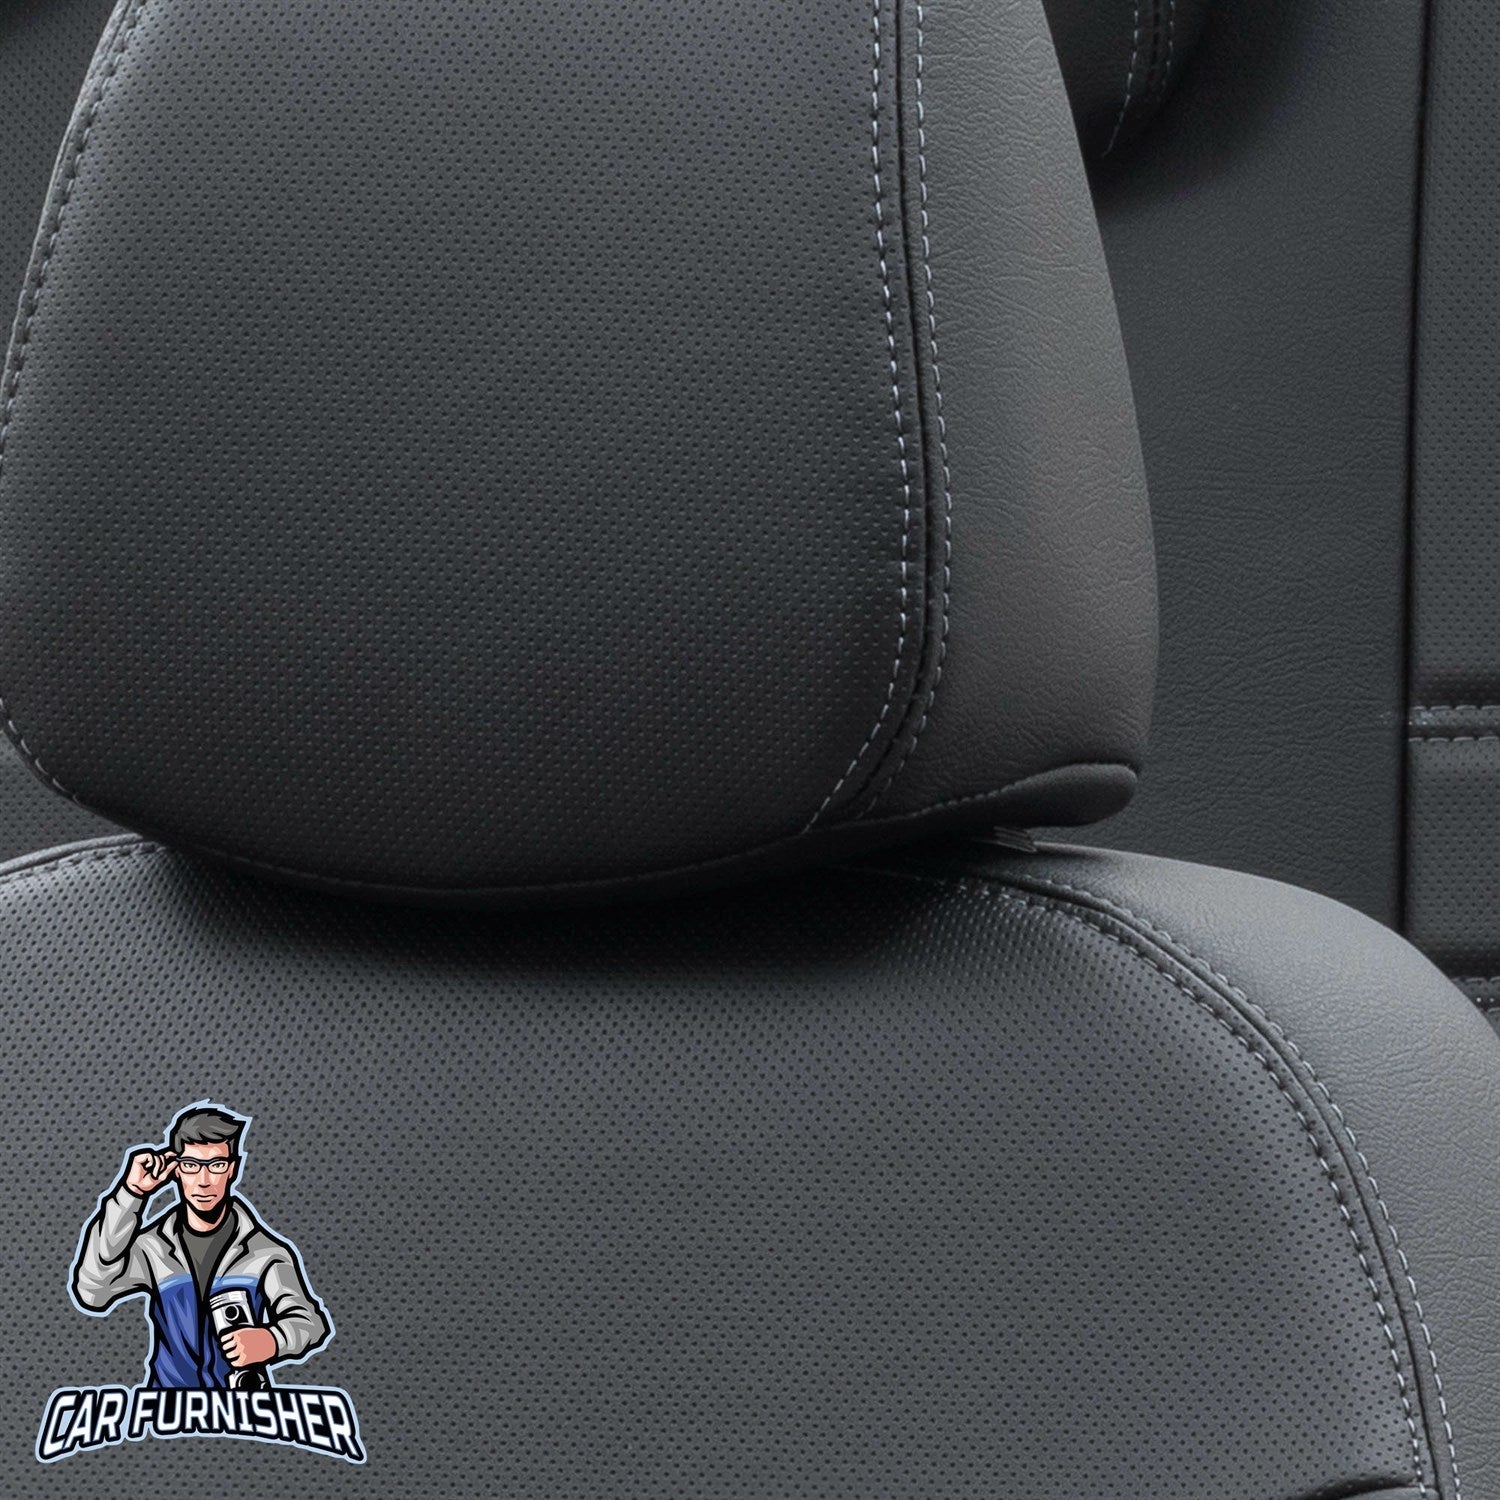 Volkswagen Caravelle Seat Cover Istanbul Leather Design Black Leather